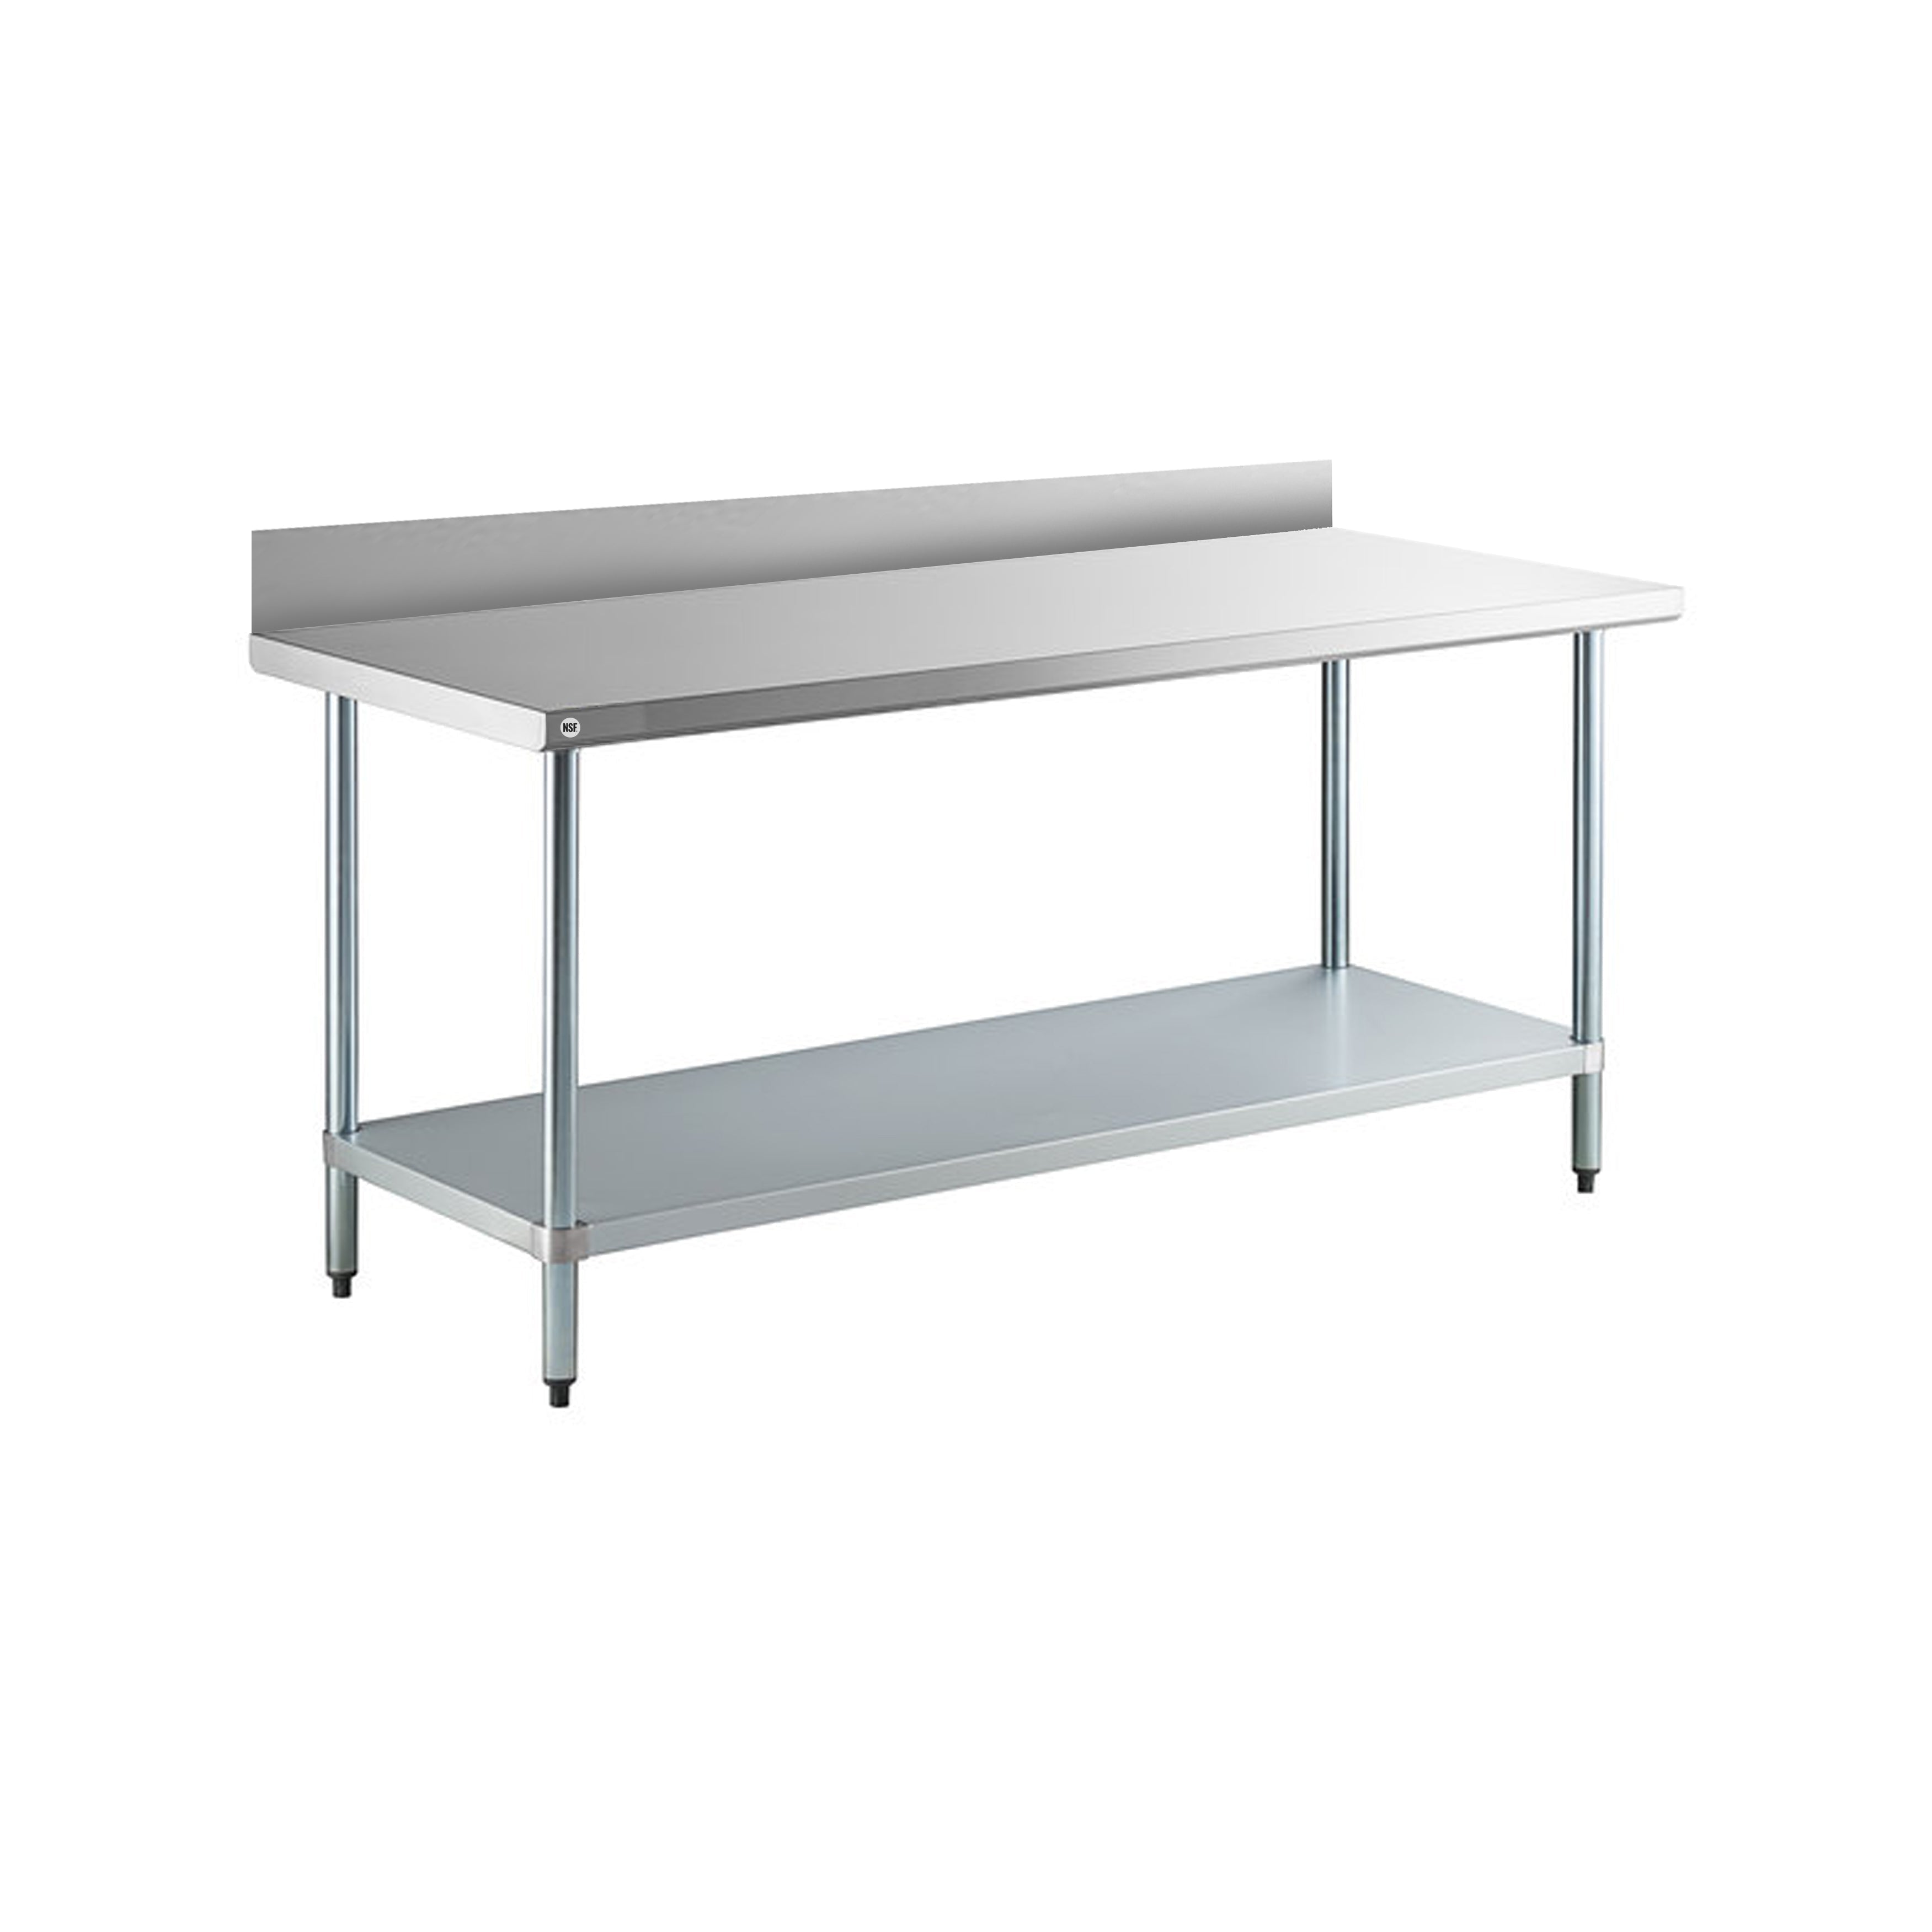 Omcan - 22092, Commercial 30" x 96" Stainless Steel Kitchen Work Table with 4" BackSplash 1700lbs Light Duty